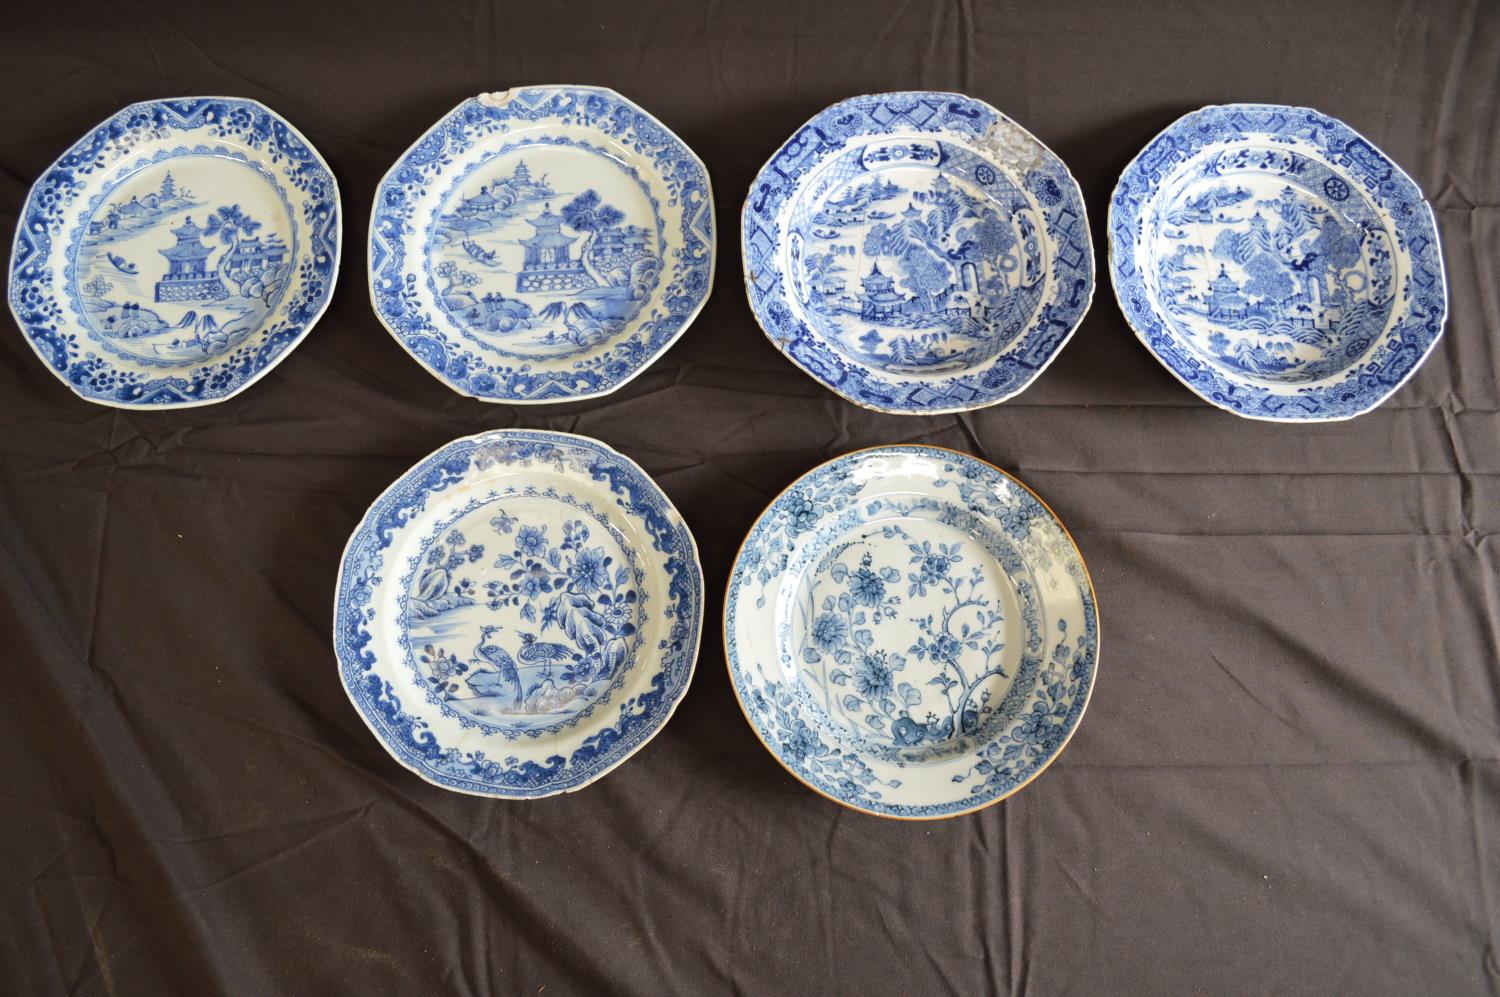 Group of eleven Oriental plates and bowls to include a pair of octagonal bowls - 22cm wide Please